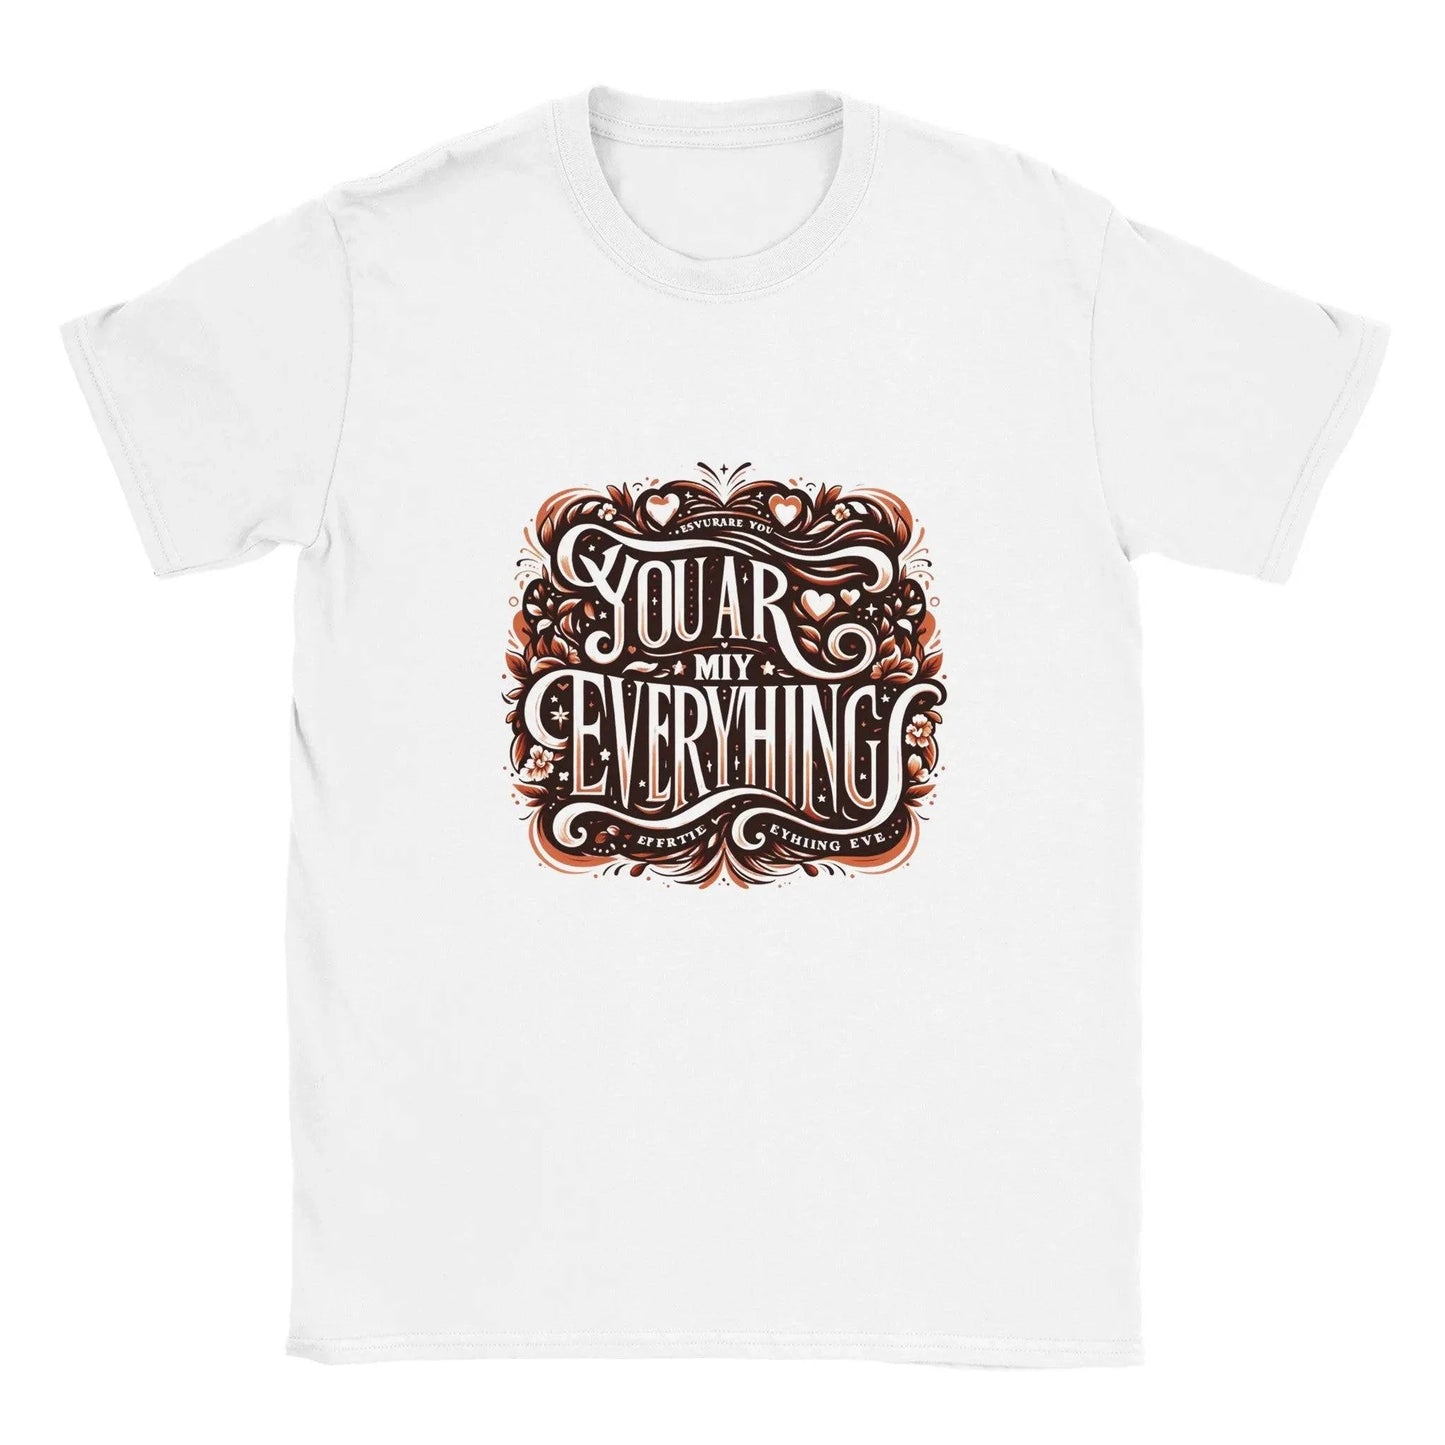 "You Are My Everything" Love and sentiment T-Shirt - 100% soft, breathable cotton - BeinCart